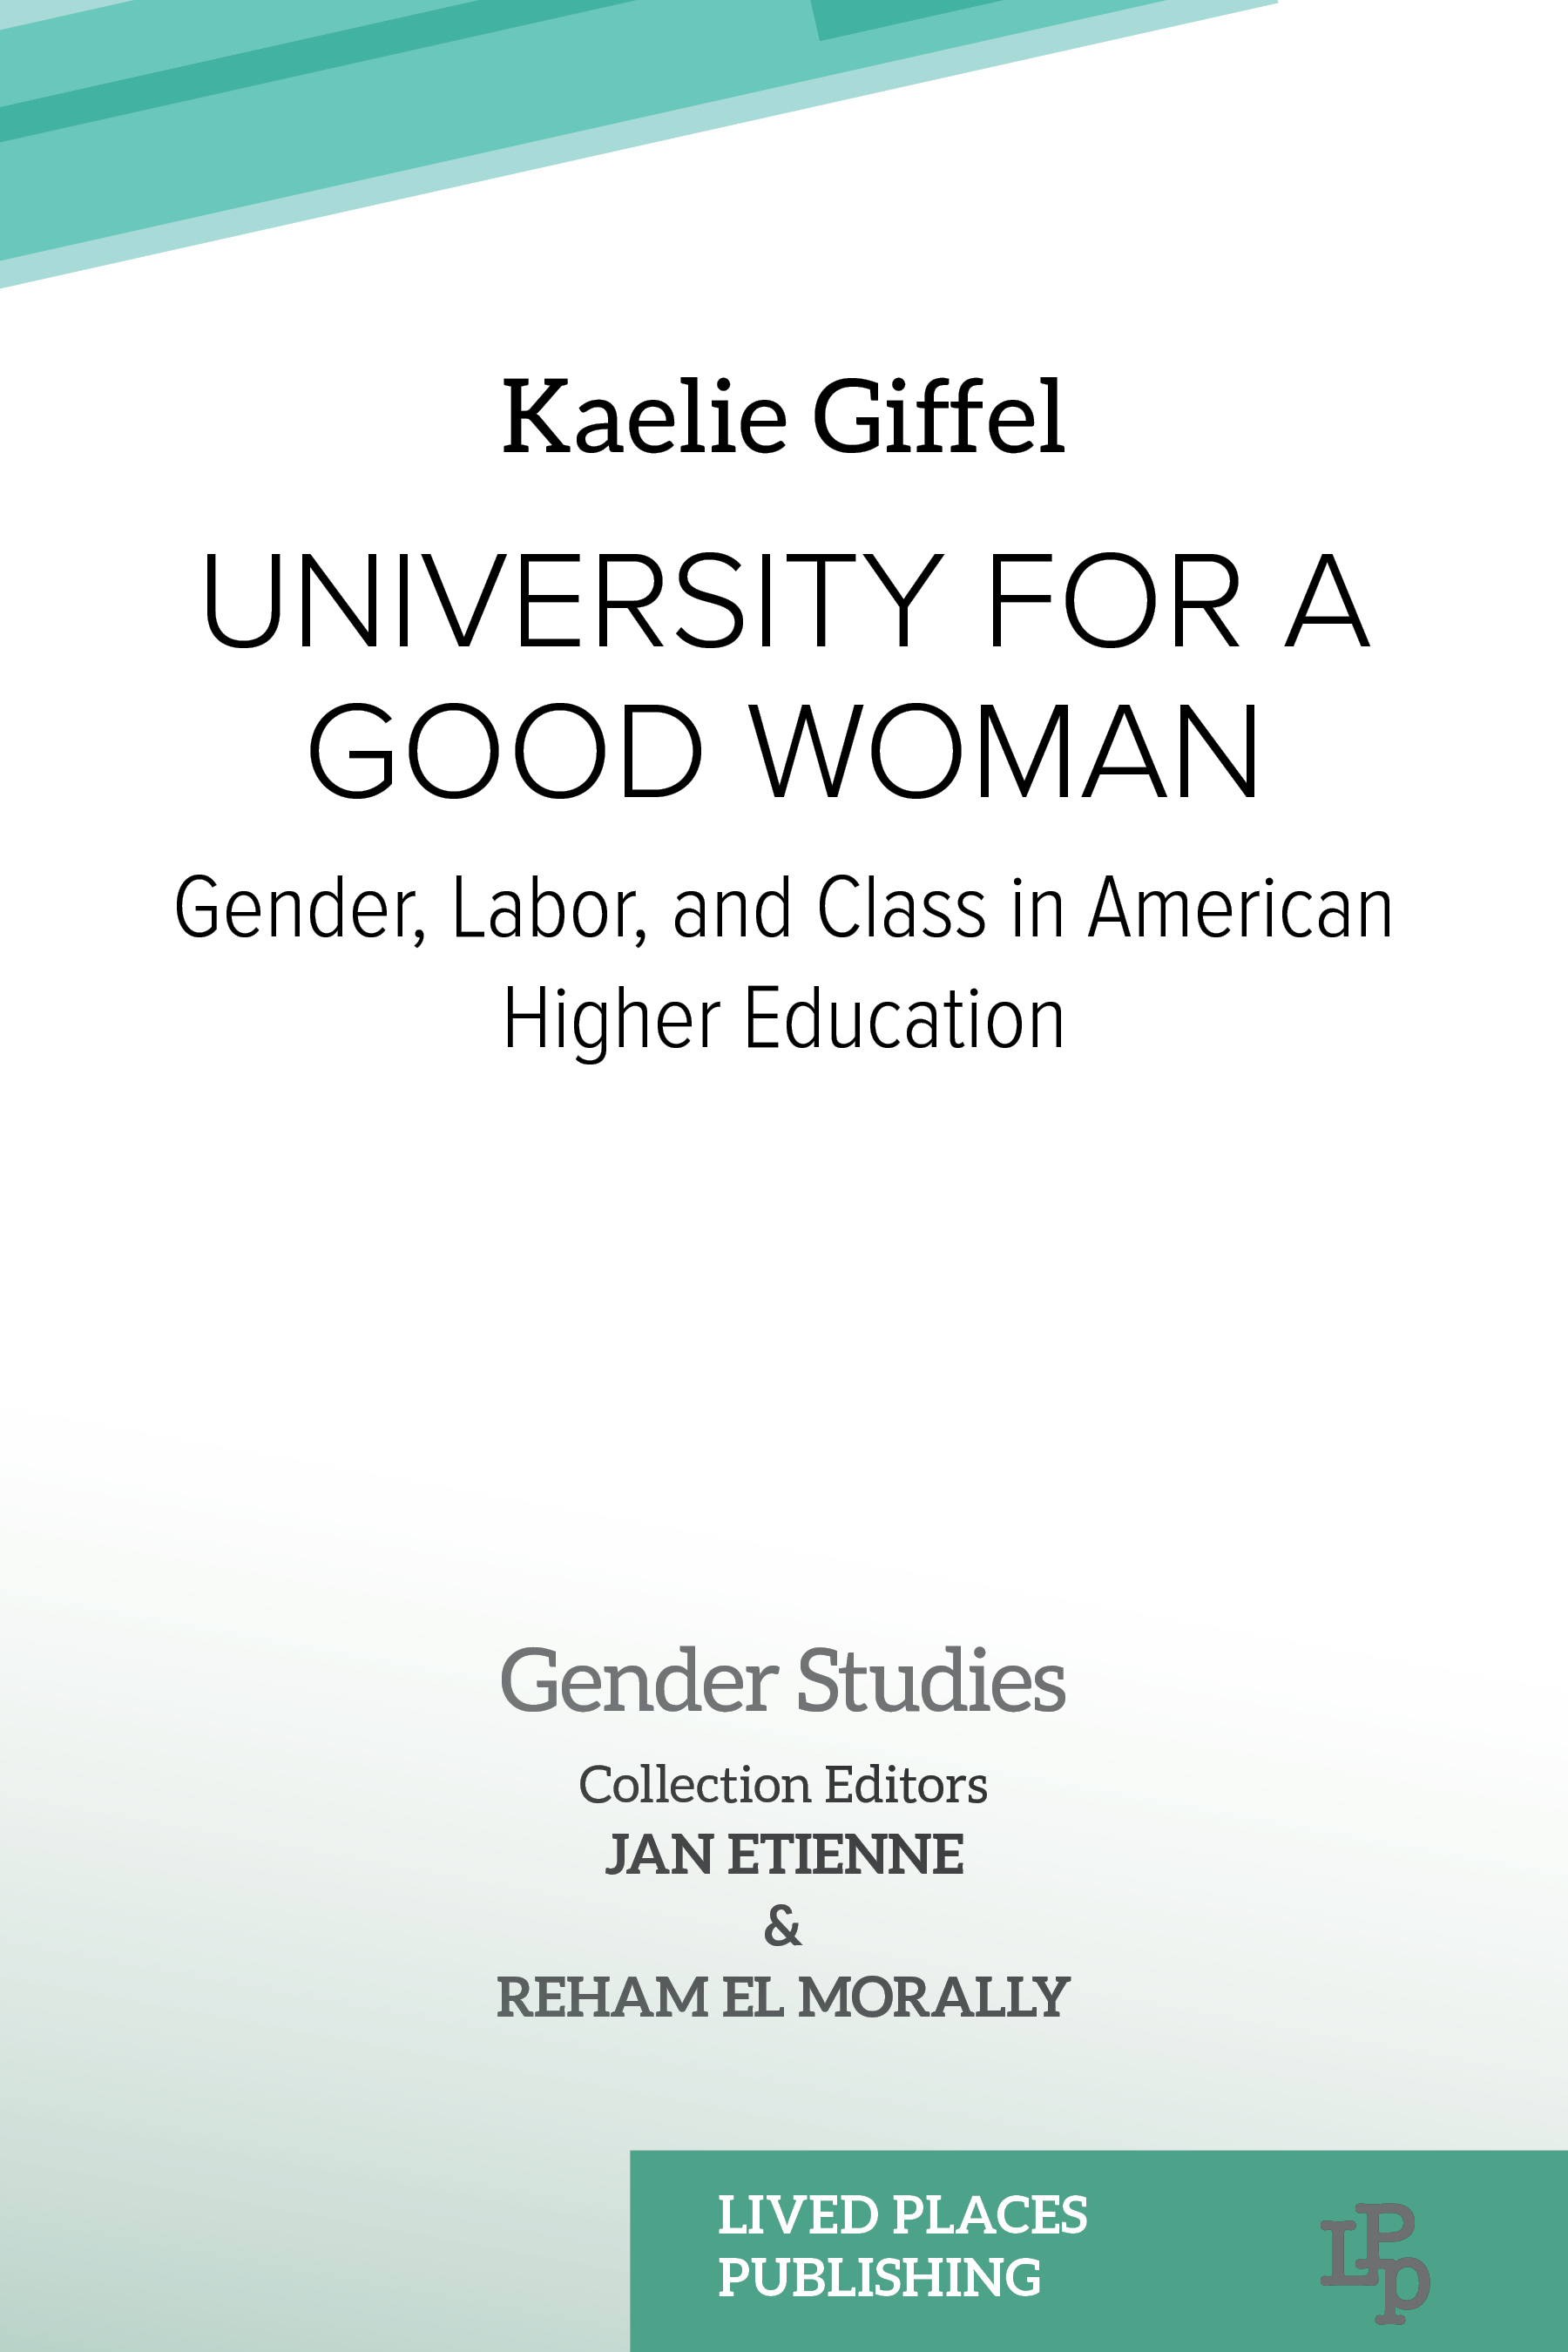 University for a Good Woman